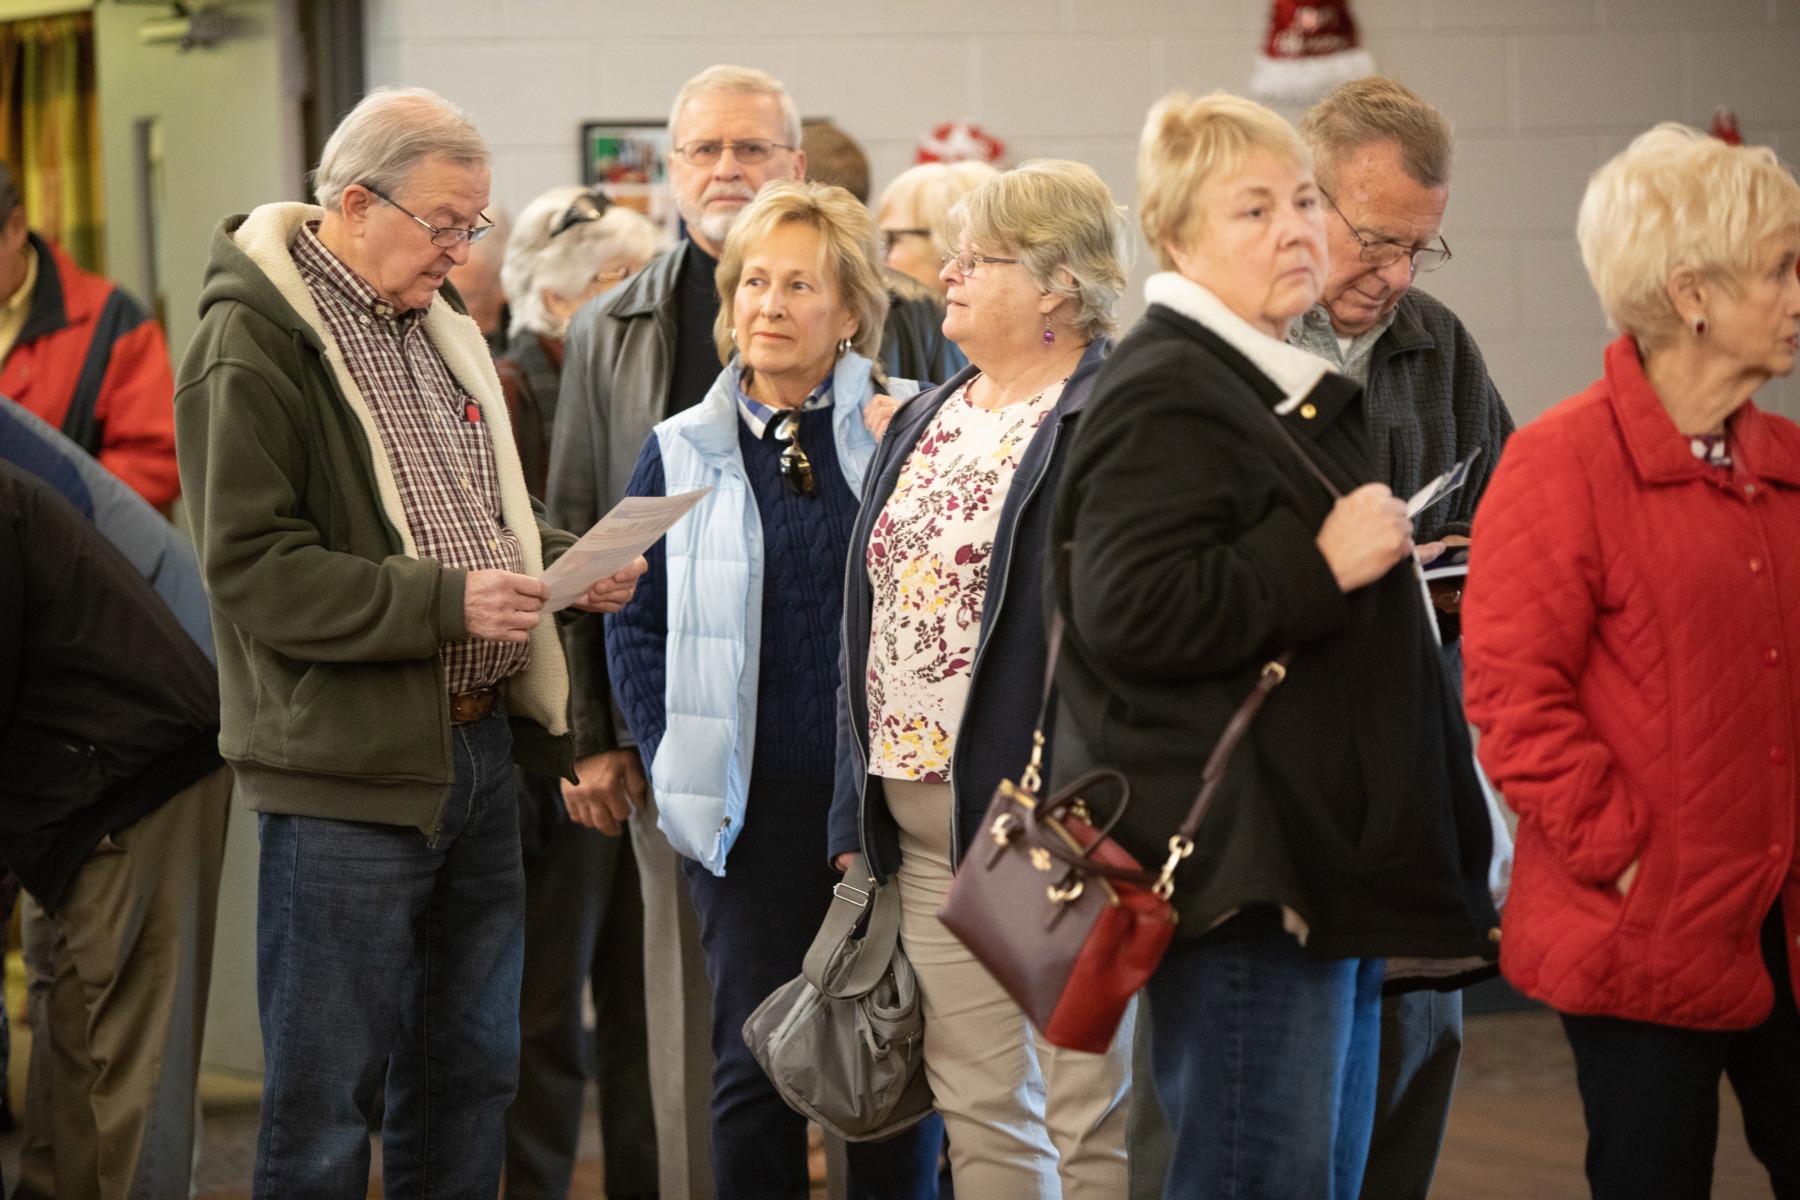 November 15, 2019: More than 100 people crowded the Central Bucks Senior Activity Center in Doylestown today for a Legislative Breakfast hosted by state Sen. Steve Santarsiero.  The audience aired concerns about a wide range of subjects including property taxes and gun violence.